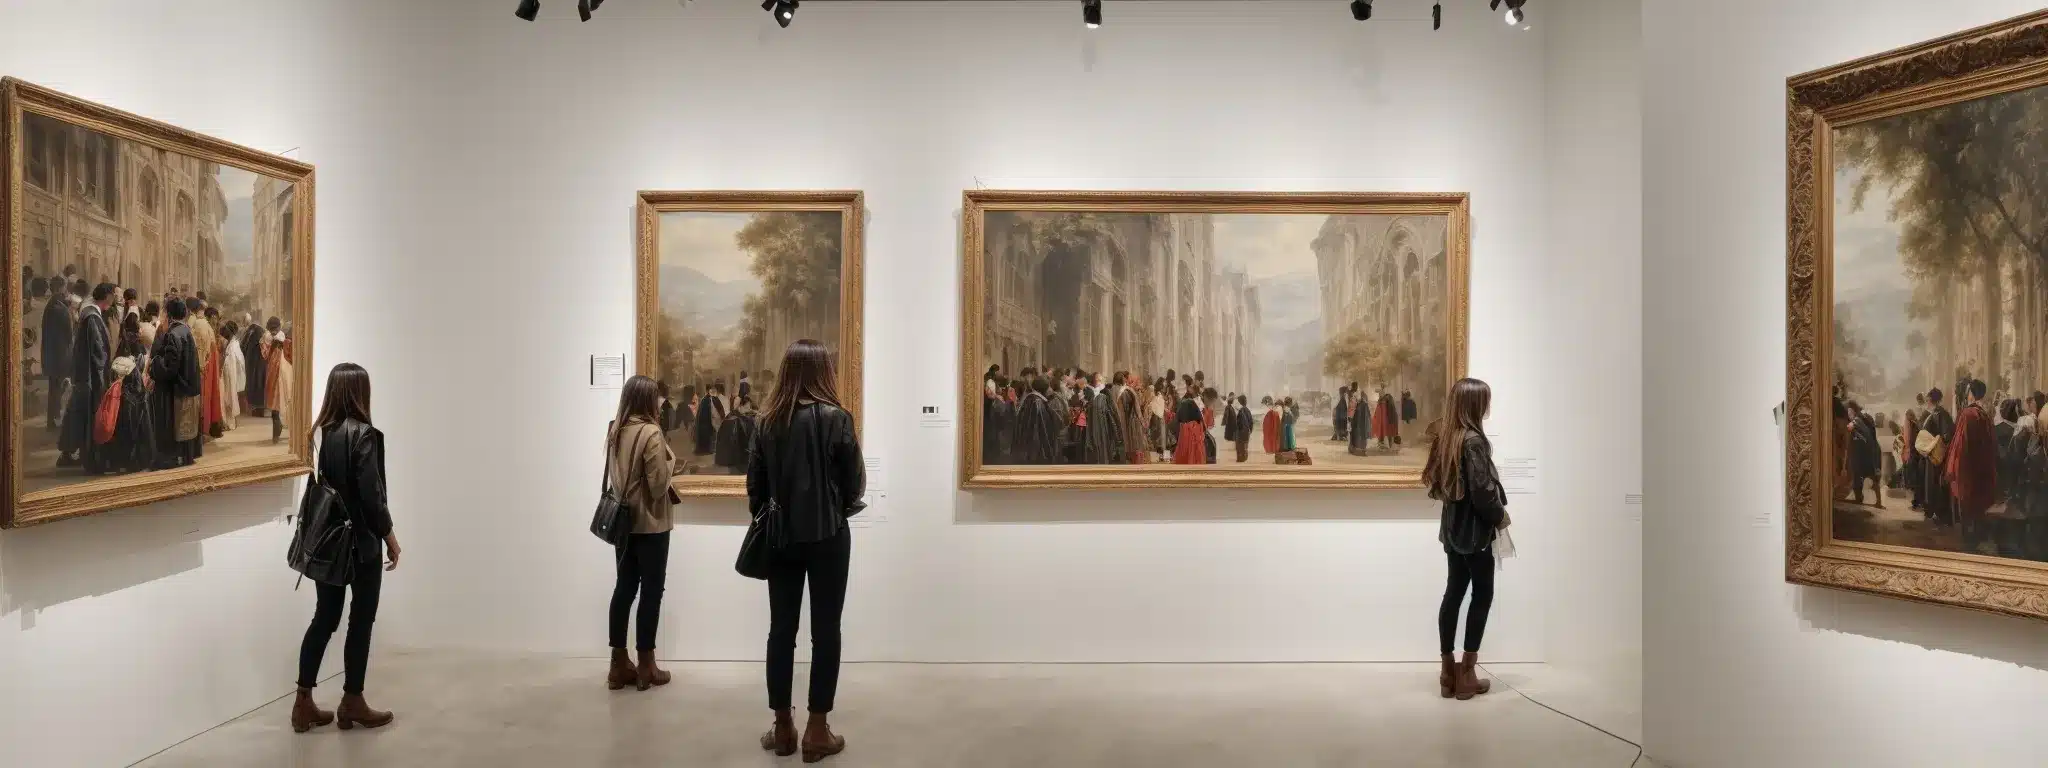 An Art Gallery With Visitors Viewing Large, Intricately Framed Paintings Hung On A Pristine White Wall.